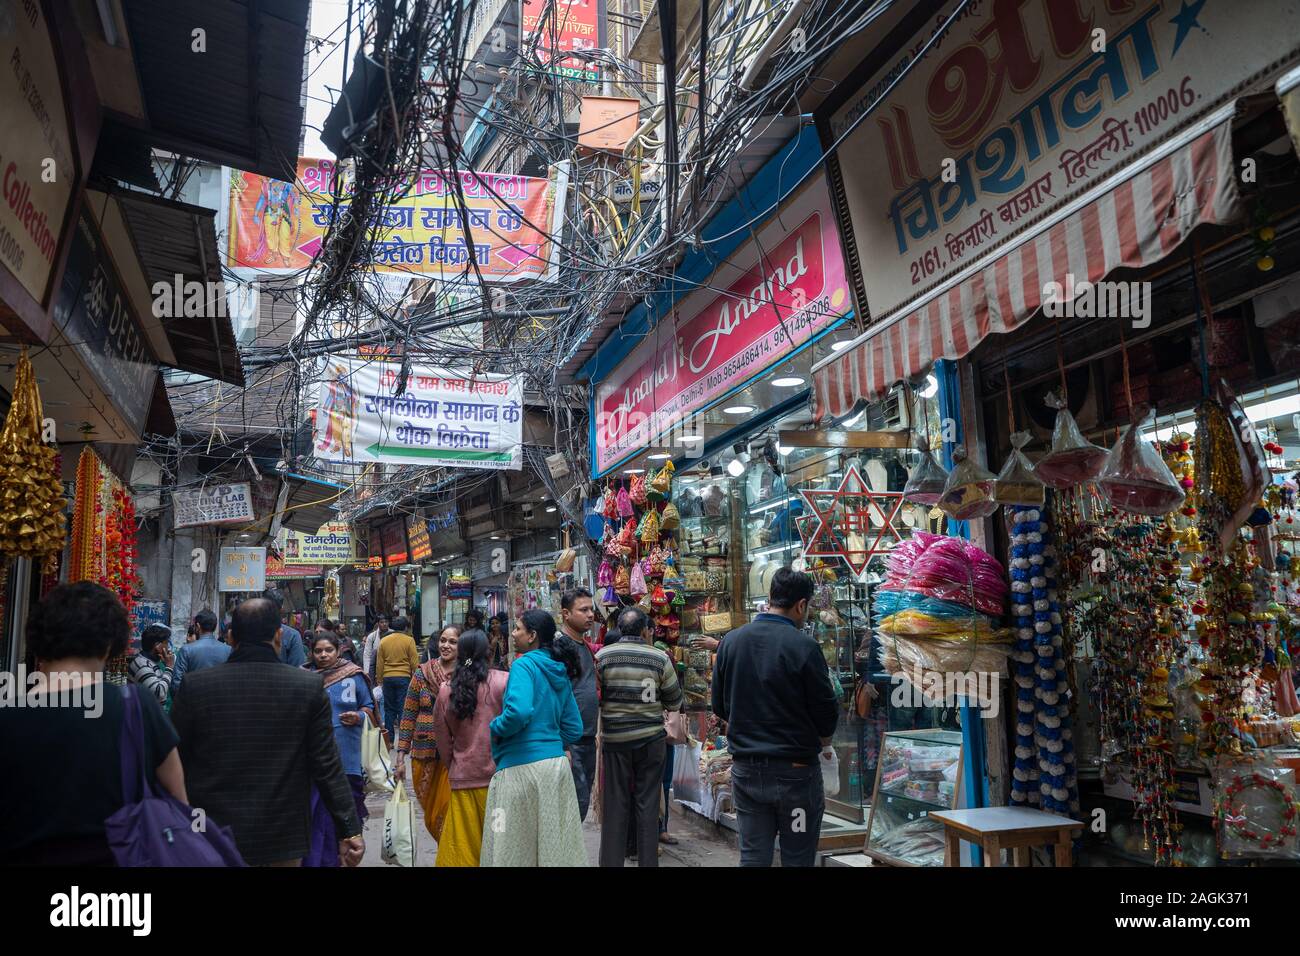 Delhi, India - December 14, 2019: Crowded Chandi Chowk market in Old Delhi, people shopping for wedding attire and decorations in the market Stock Photo